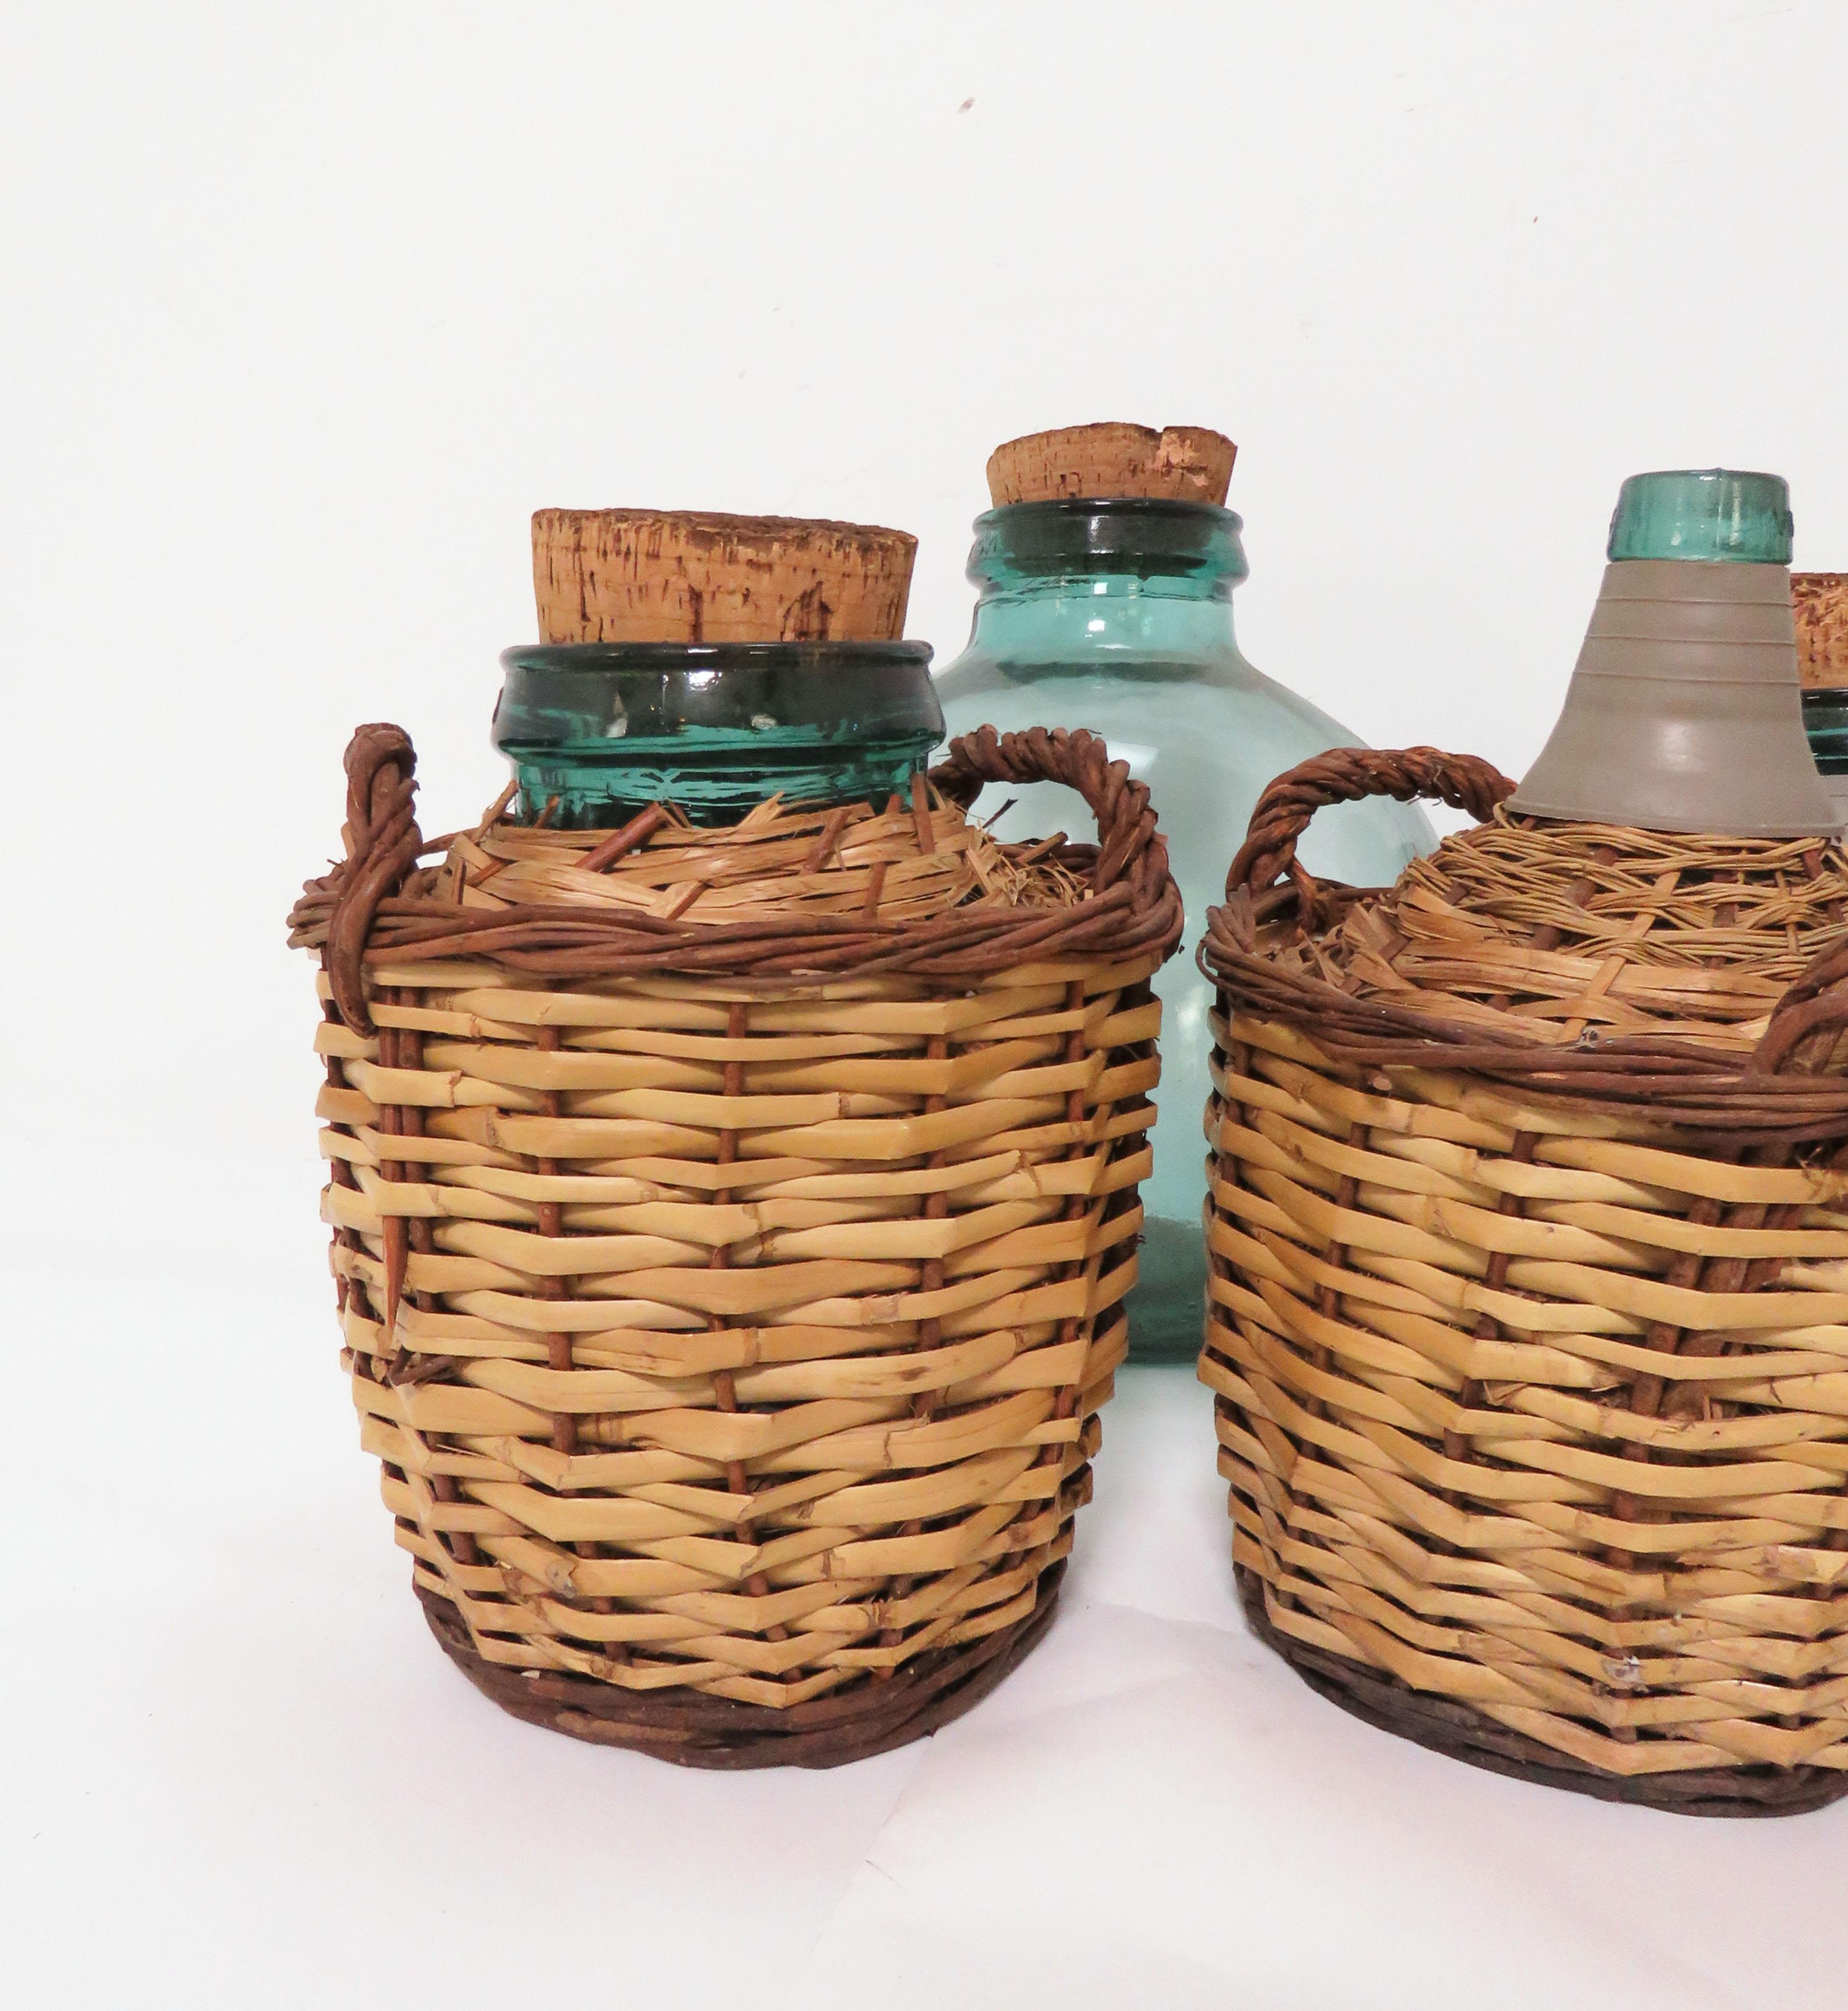 Collection of seven demijohns or carboys, most in original baskets, by Viresa, France, circa 1930s-1940s. Various sizes ranging from the largest one (in a basket), measures: 16